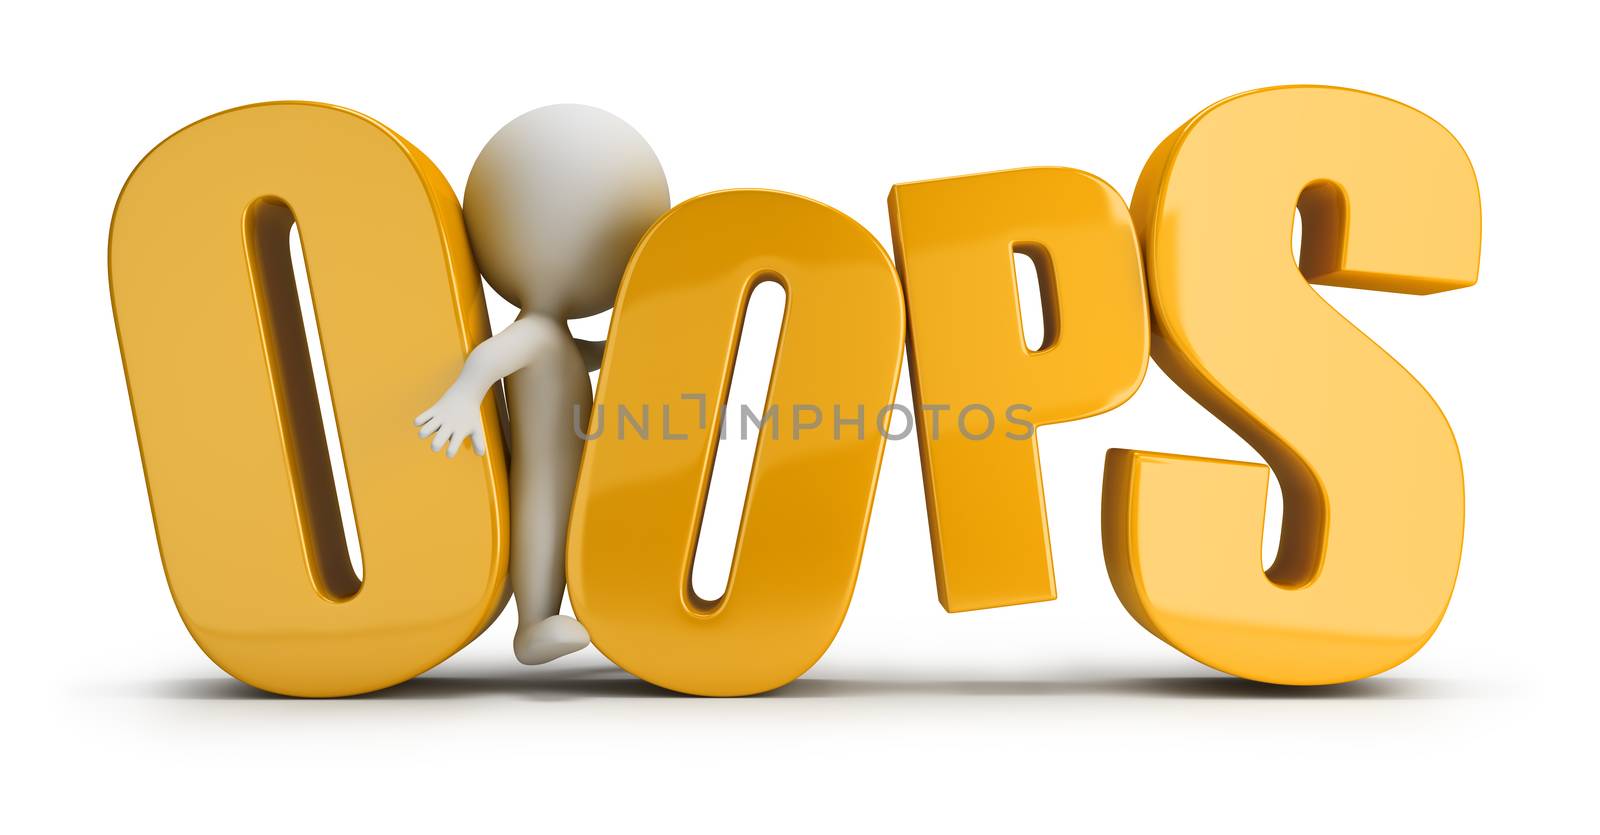 3d small person stuck between letters in a word oops. 3d image. White background.